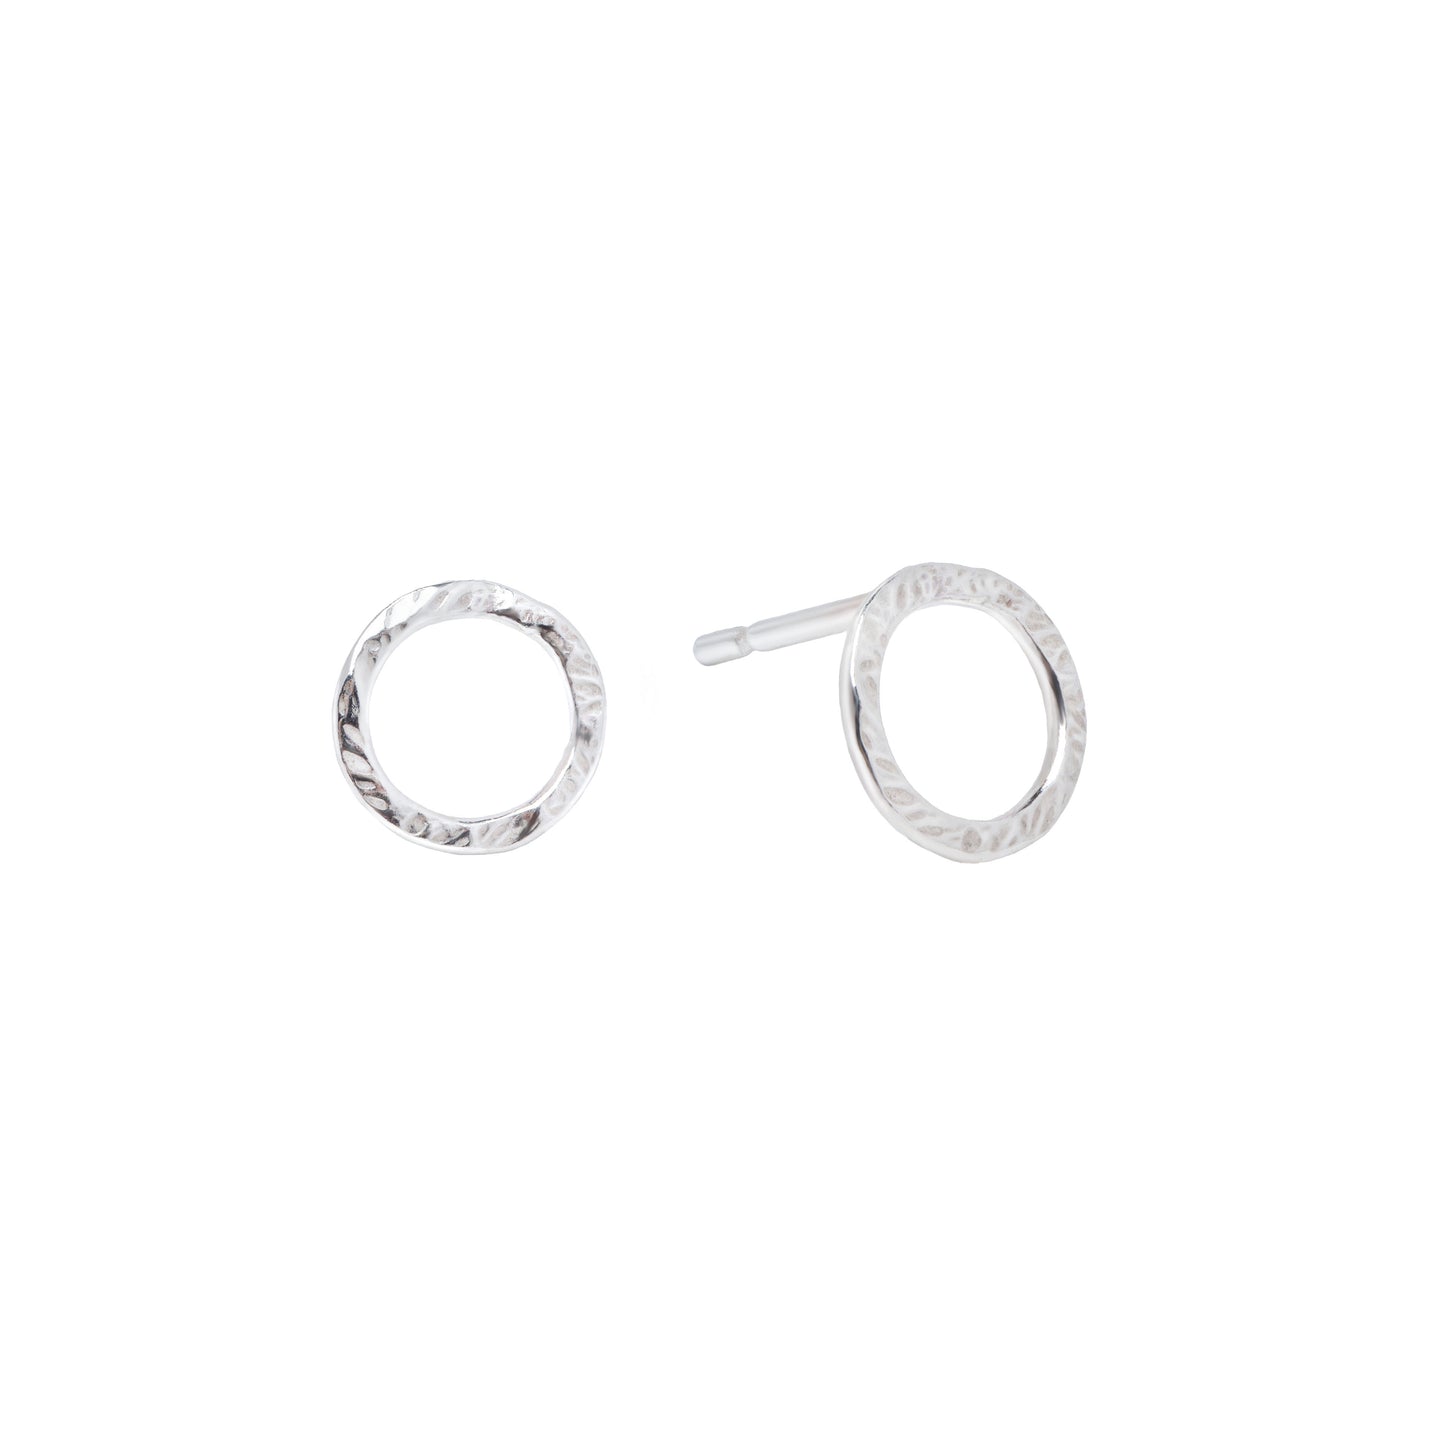 Small Hammered Circle Stud Earrings in Silver